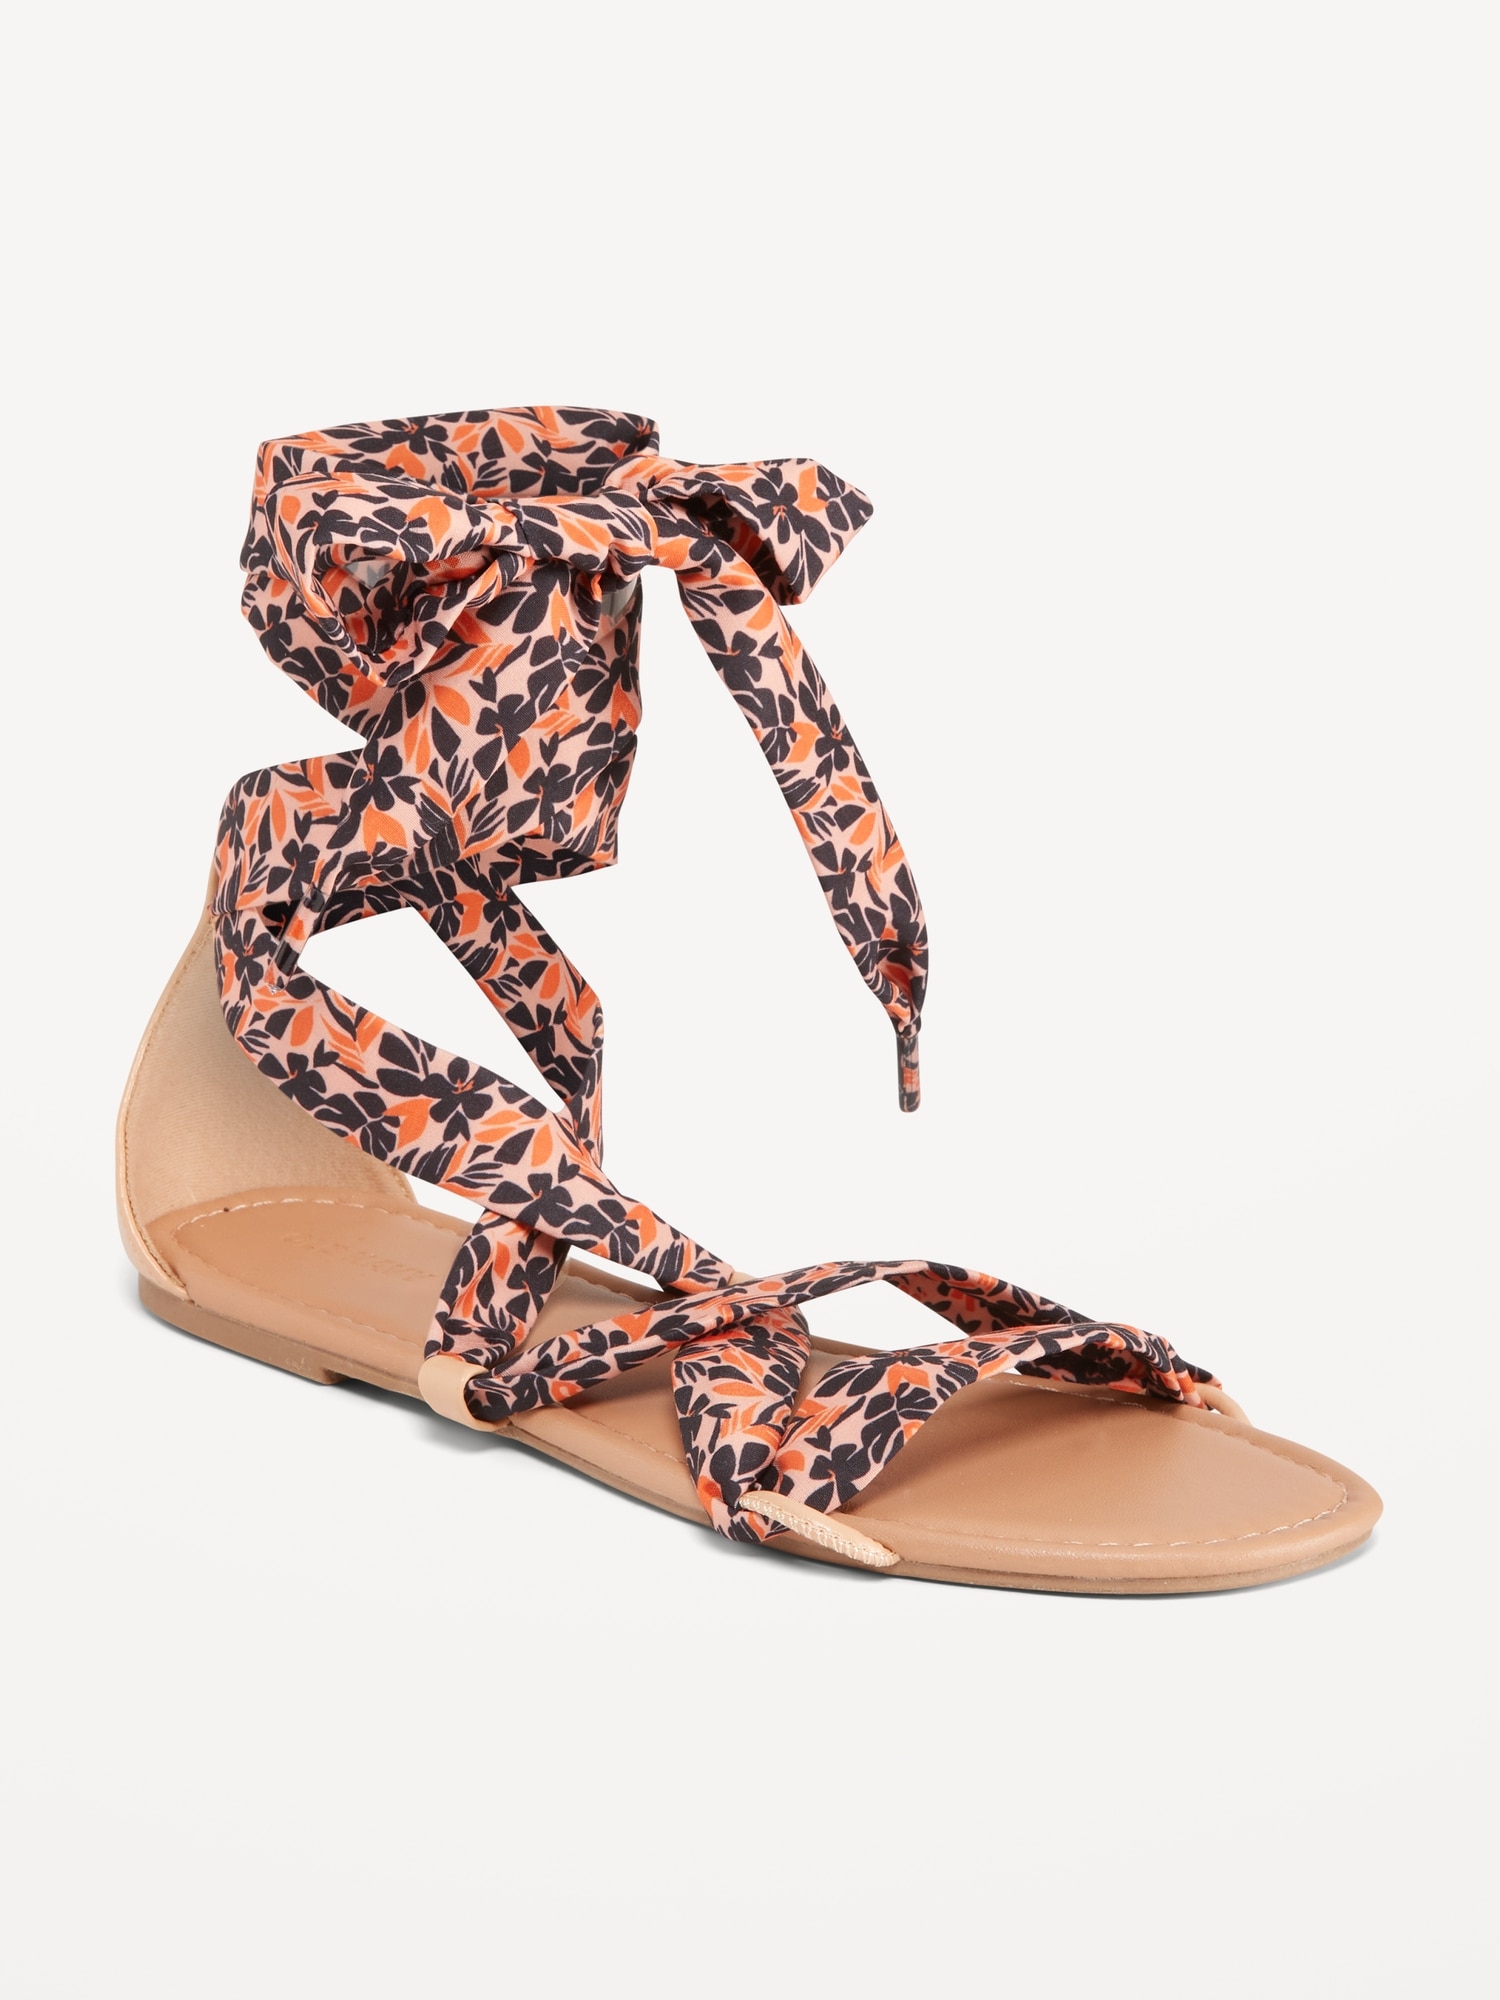 Old Navy Women's Square-toe Mule Sandals